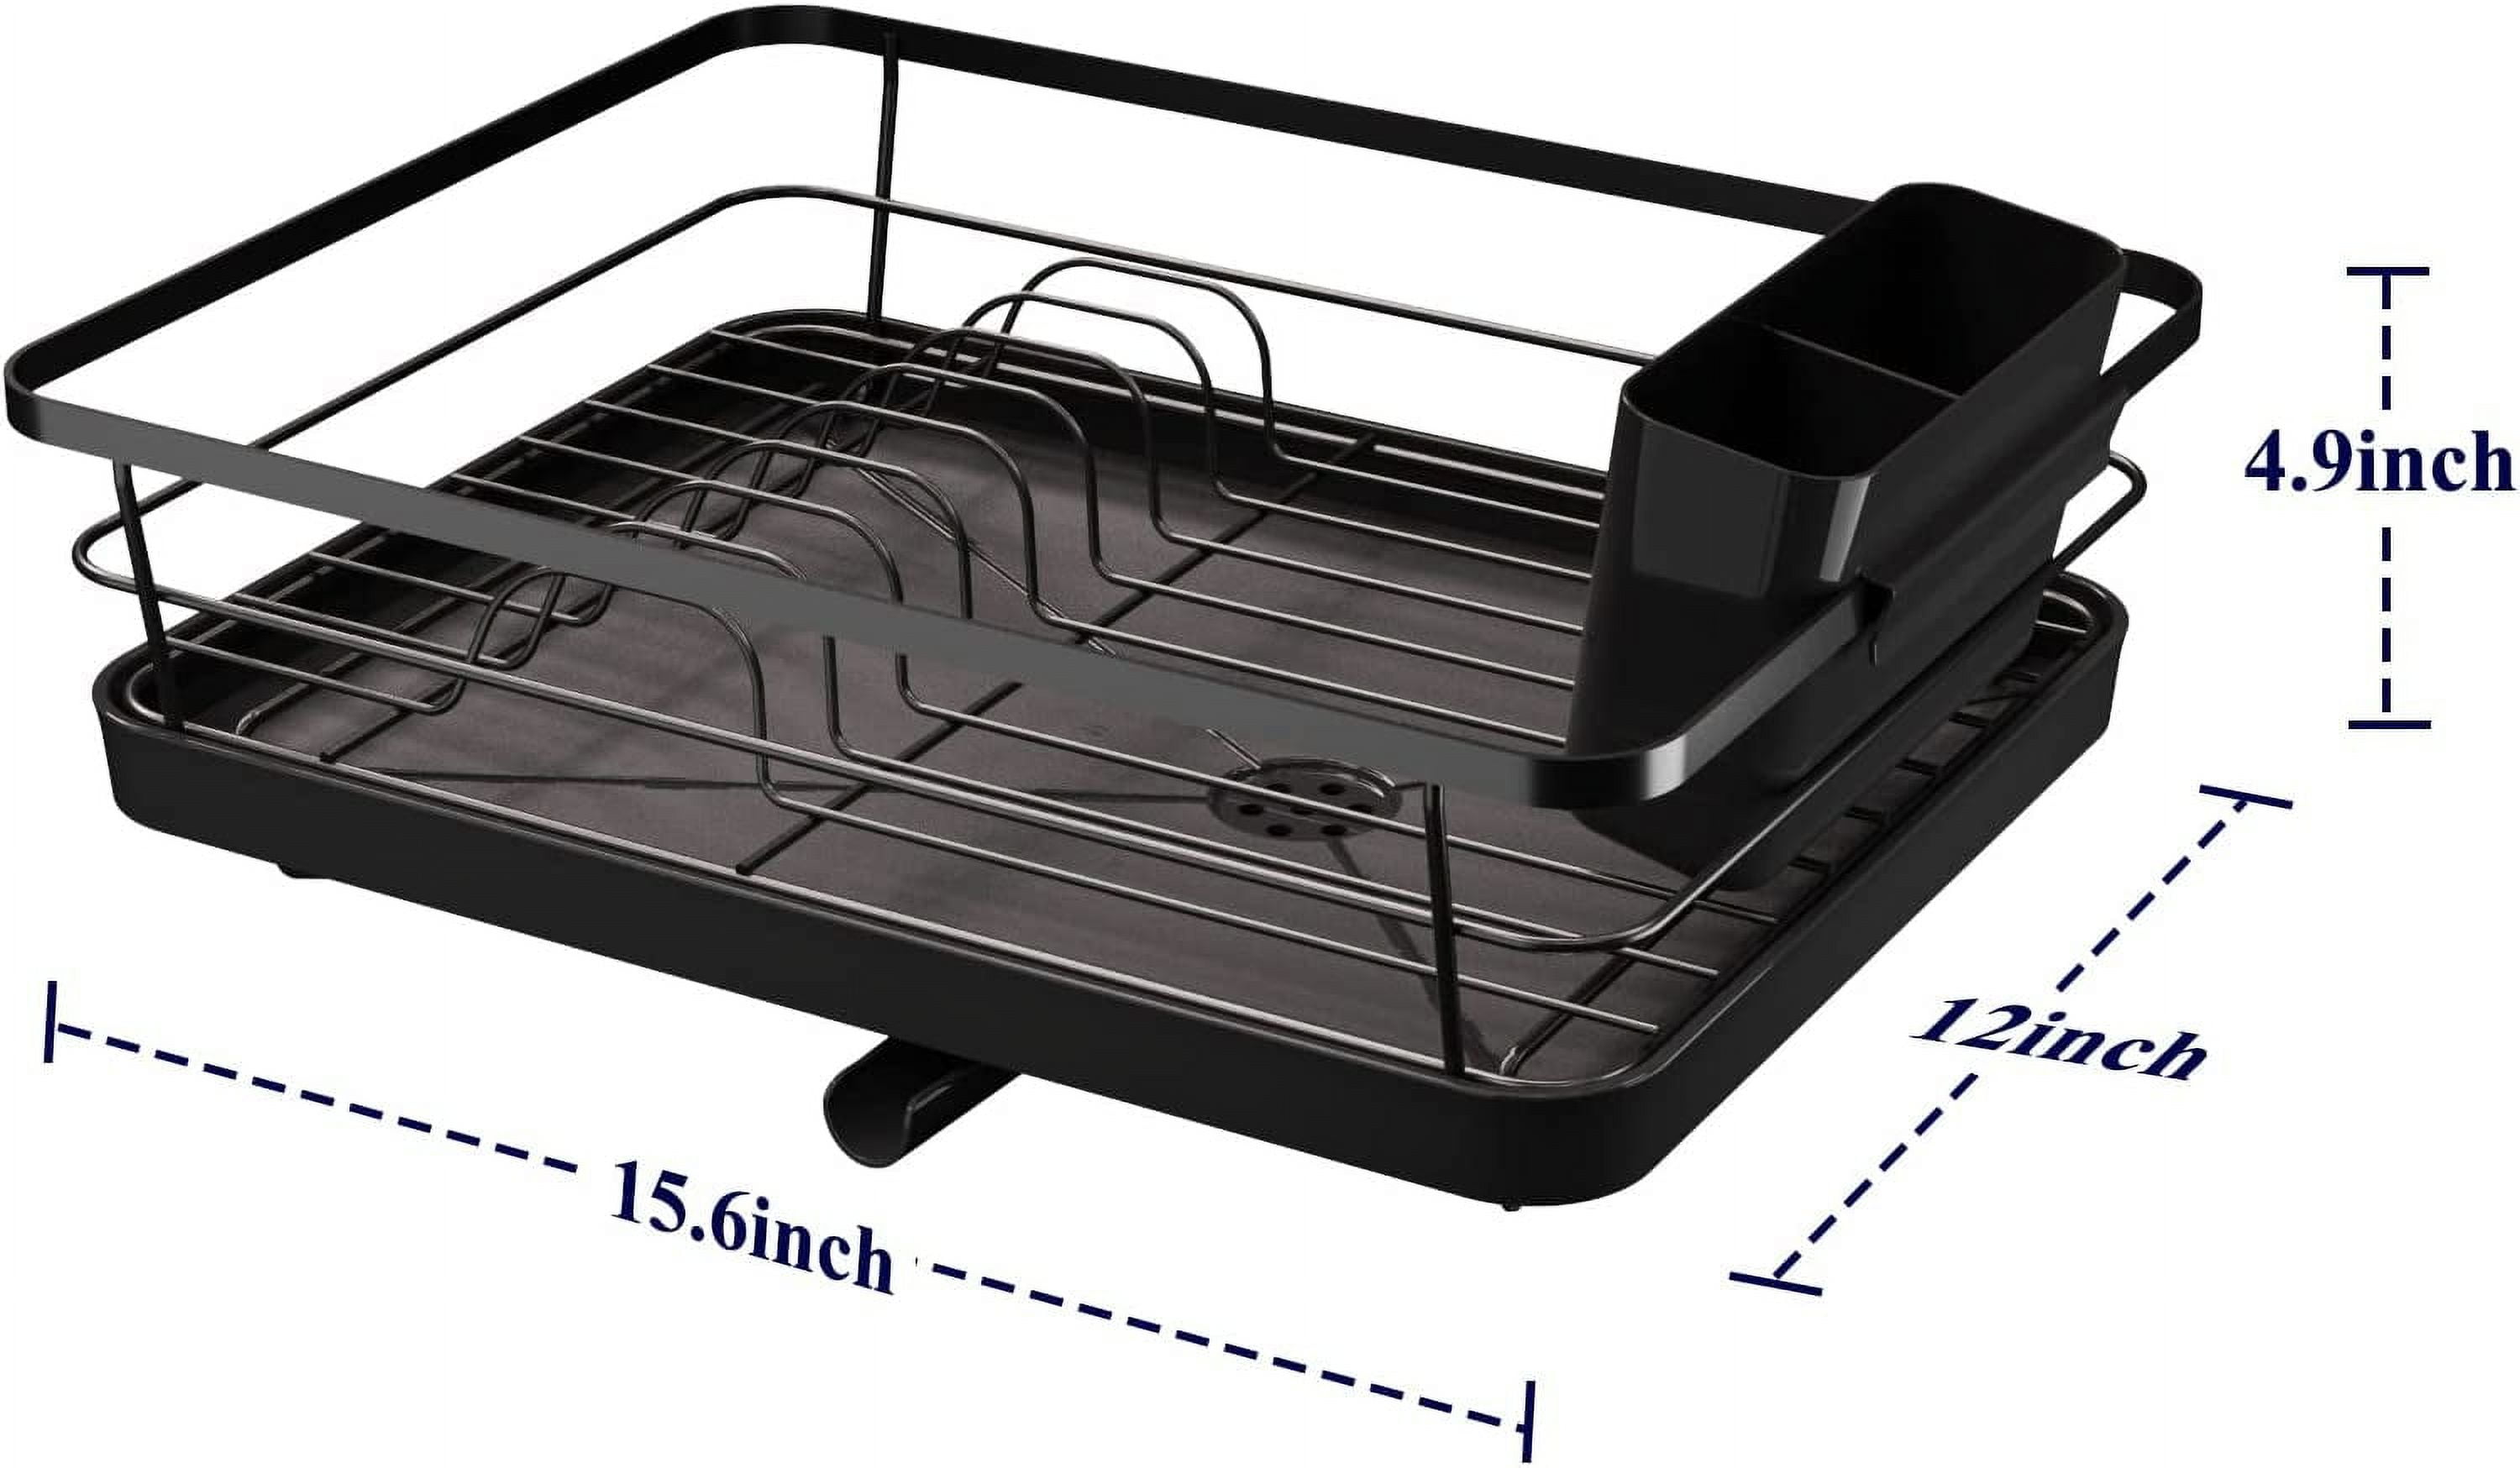 HappyHapi Drying Rack with Drainboard Utensil Holder - Durable Dish Rack  for Kitchen Counter Organization of Dishes, Knives, Spoons and Forks (Black)